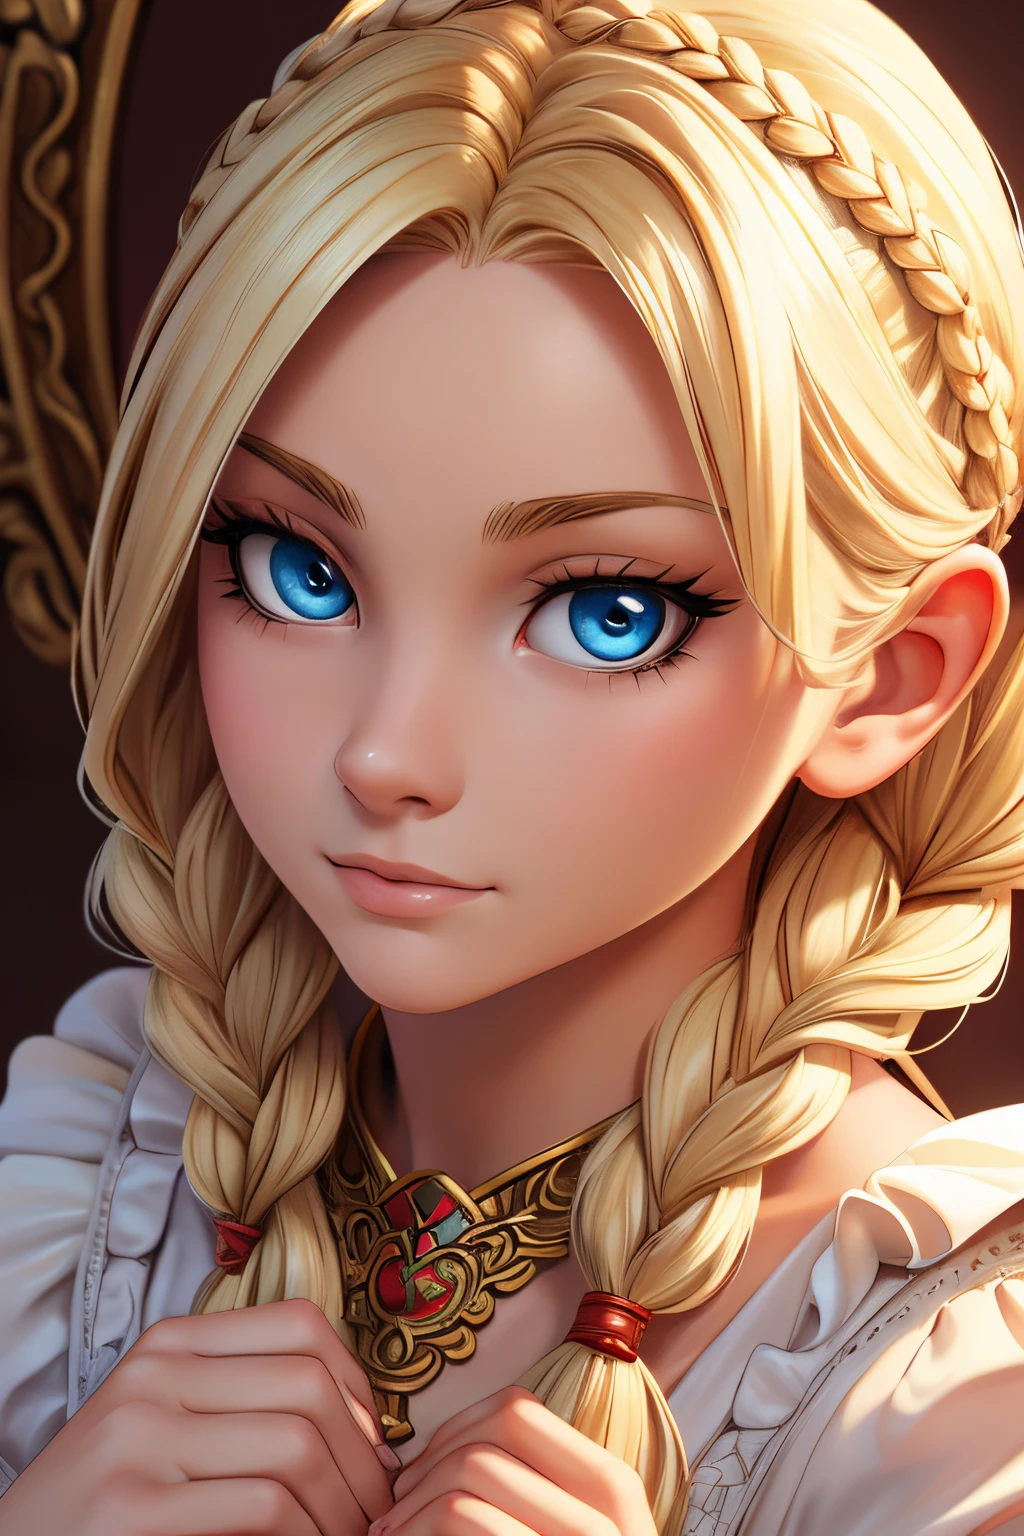 ((ultra quality)), ((tmasterpiece)), beautiful young Slavic girl, ((blonde woman, hairlong, Long braid)), Beautiful cute face, beautiful female lips, charming beauty, ((Kind expression on his face)), is looking at the camera, slightly closed eyes, ((Skin color: white)), Body glare, ((detailed beautiful female eyes)), ((big blue eyes)), beautiful female hands, ((perfect female figure)), ideal female body shapes, Beautiful waist, nice feet, big thighs, Beautiful butt, ((Subtle and beautiful)), seductively worth it ((closeup face)), ((clothes from Slavic fantasy, White dress with red ornate ruffles)) background: flower field, Beautiful sunset, ((Depth of field)), ((high quality clear image)), ((crisp details)), ((higly detailed)), Realistic, Professional Photo Session, ((Clear Focus)), ((cartoon)), the anime, NSFW